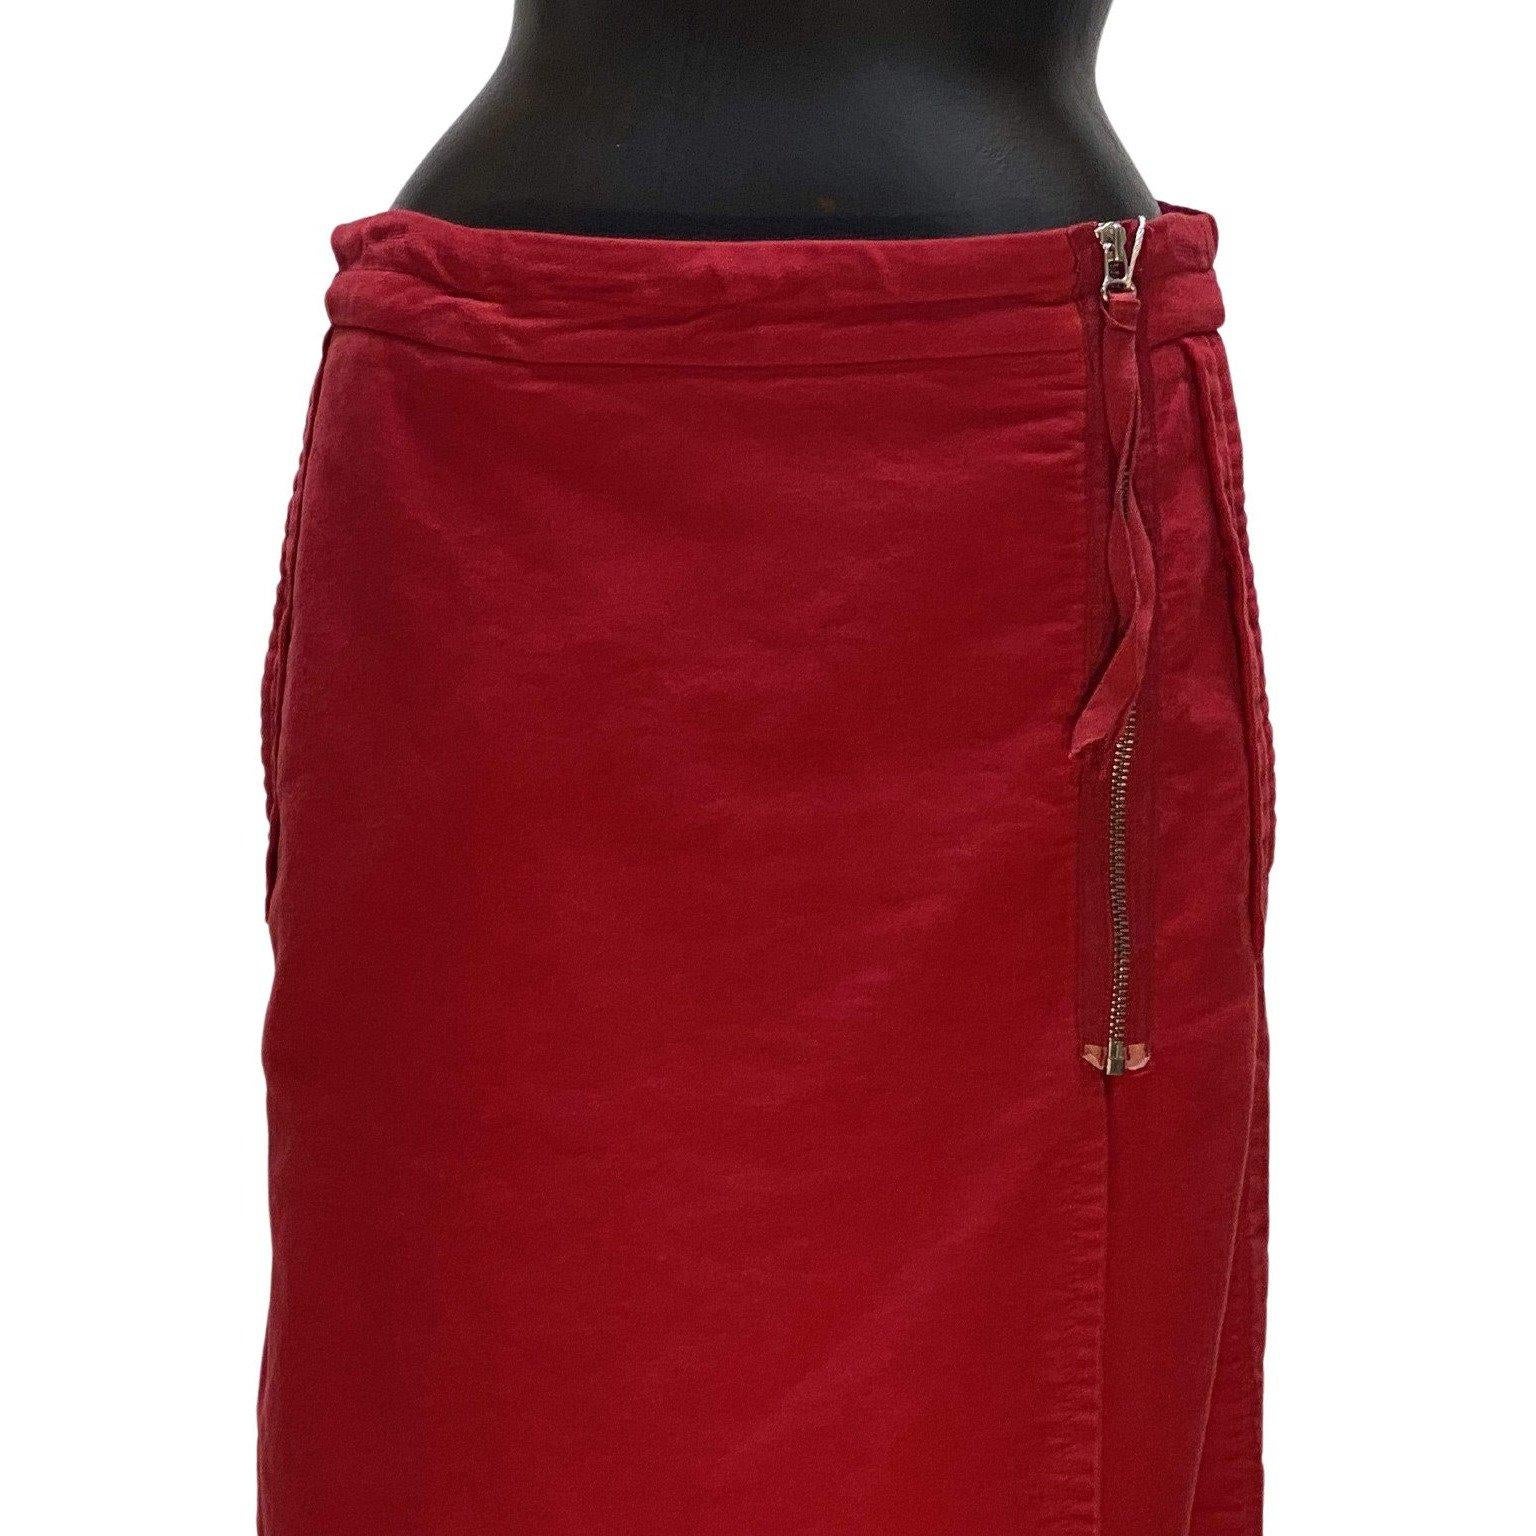 This vibrant red Maison Martin Margiela Wrap Skirt is made of an irresistible soft cotton. The wrap-style vintage, knee-length skirt secures with an inner button and outer zip along the front left hip. This skirt also offers plenty of well-appointed